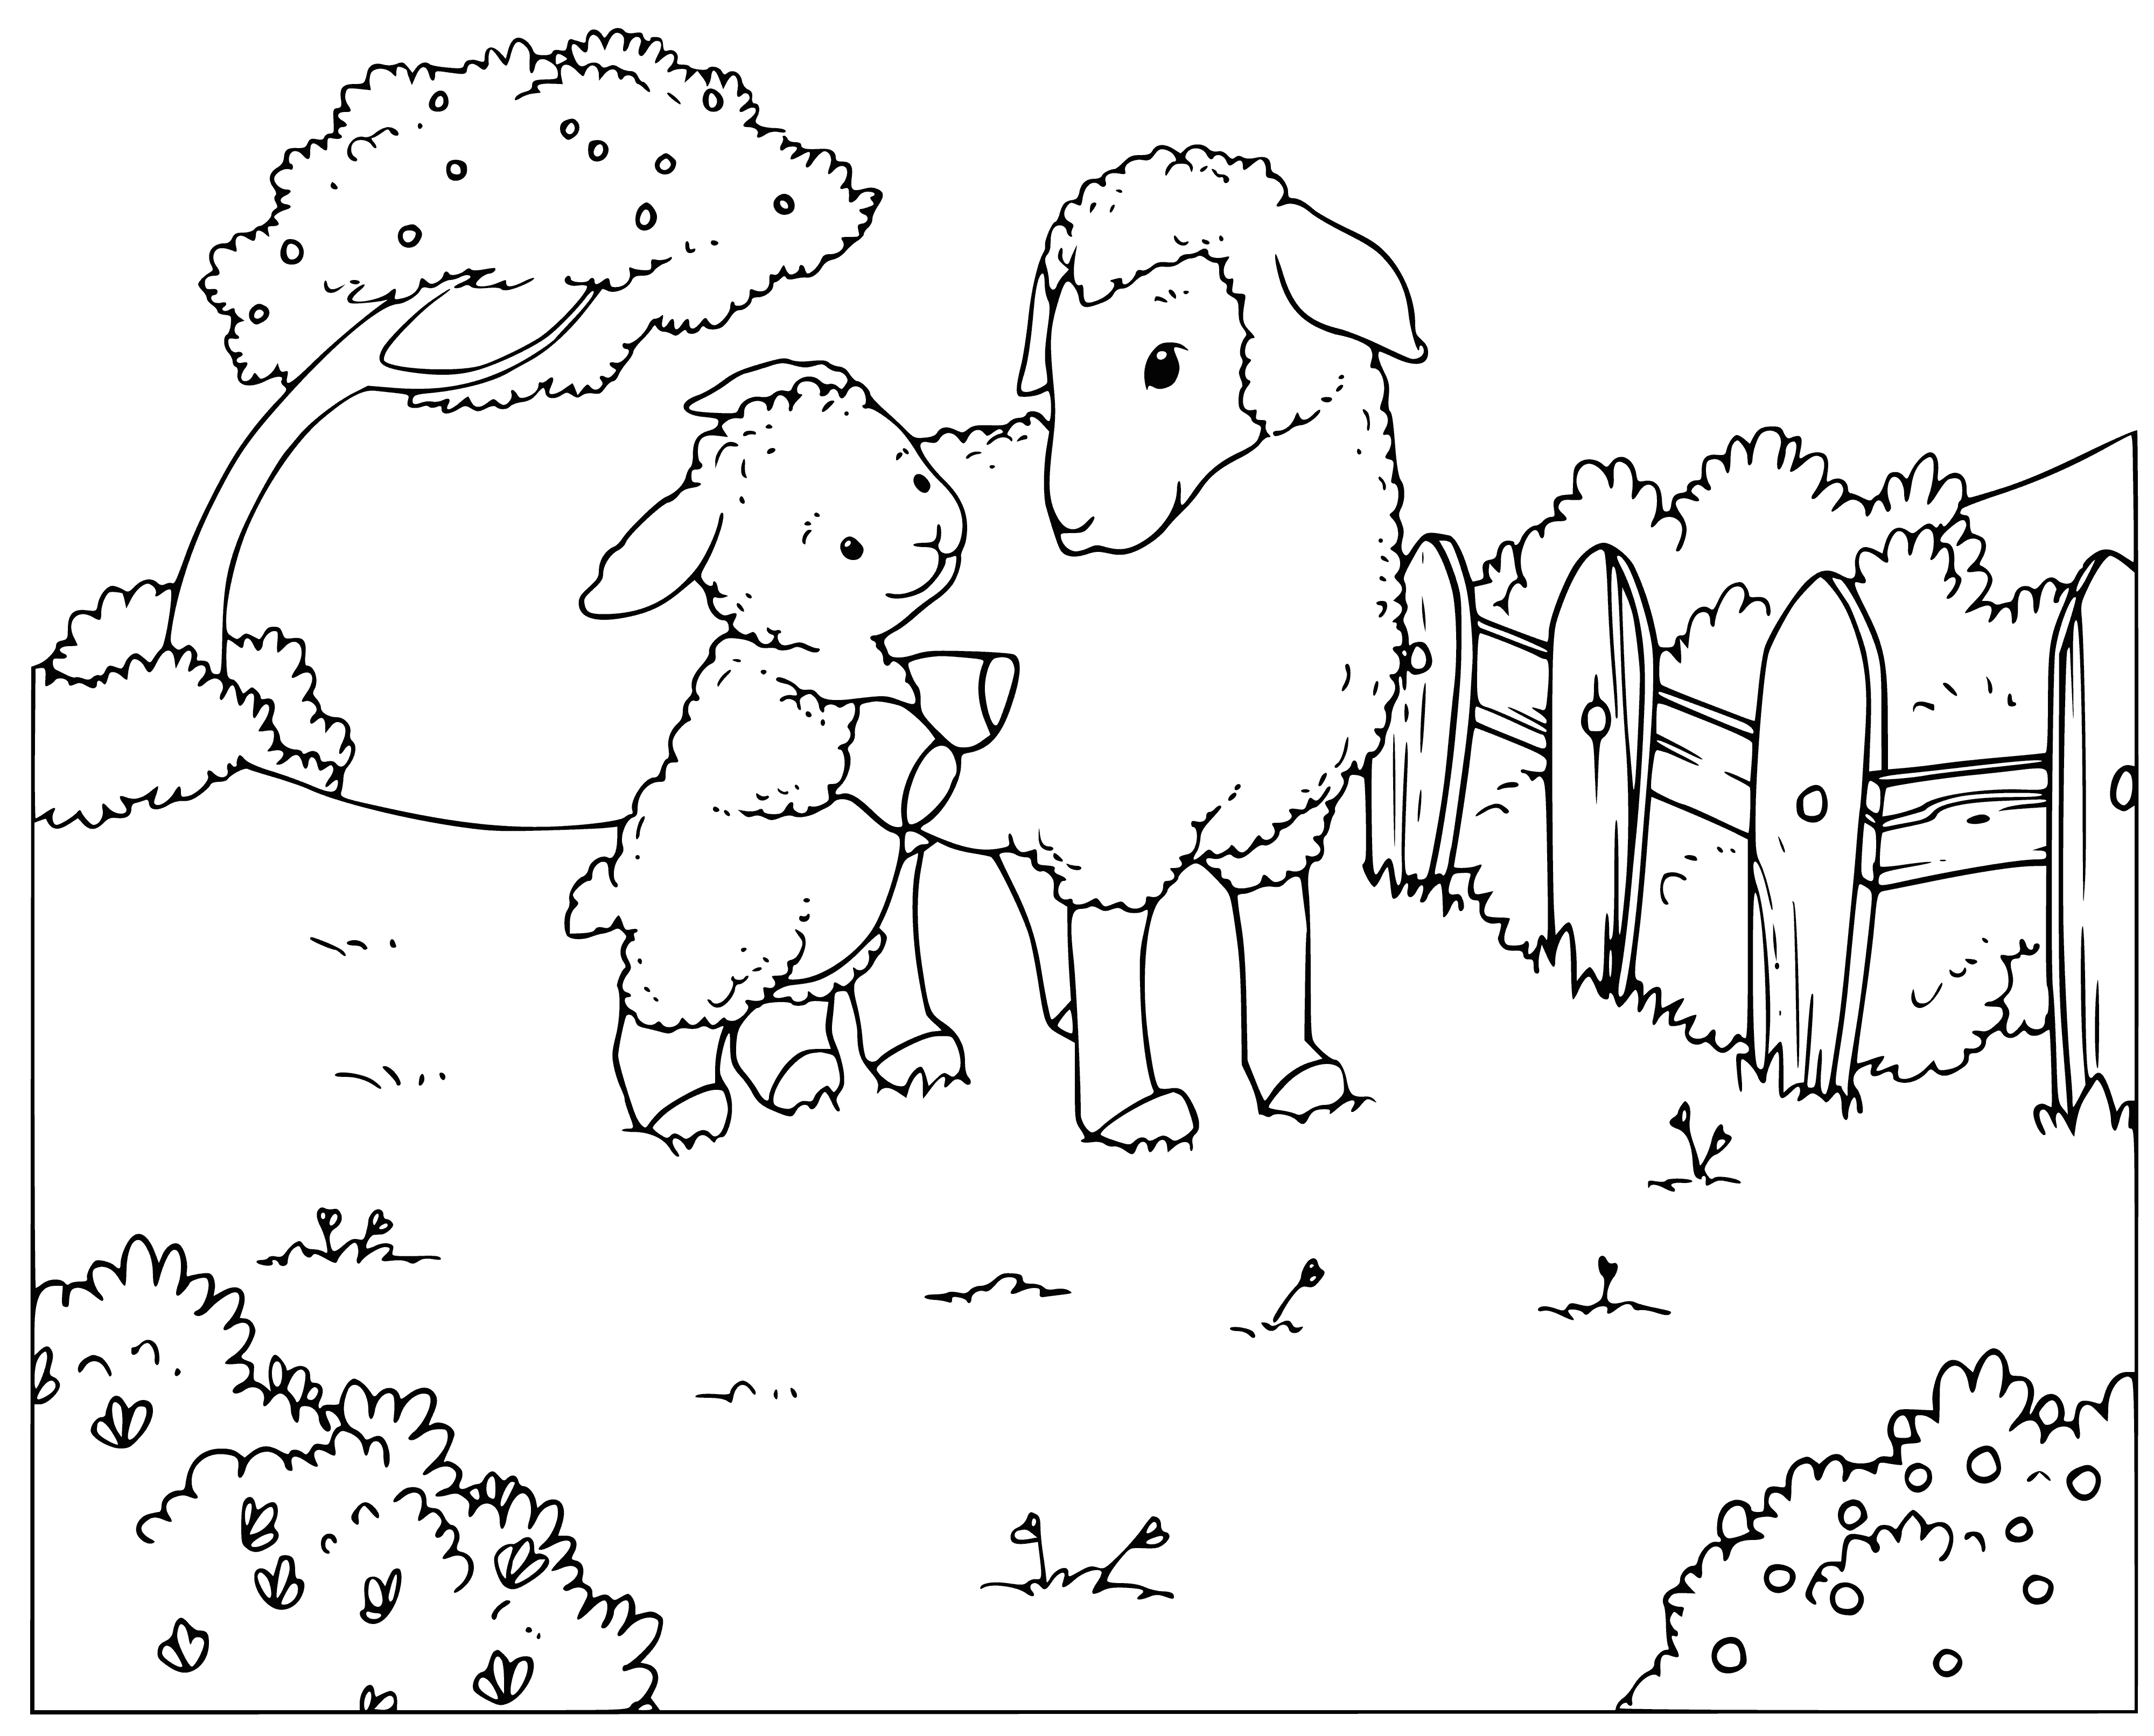 Oatmeal and barley coloring page